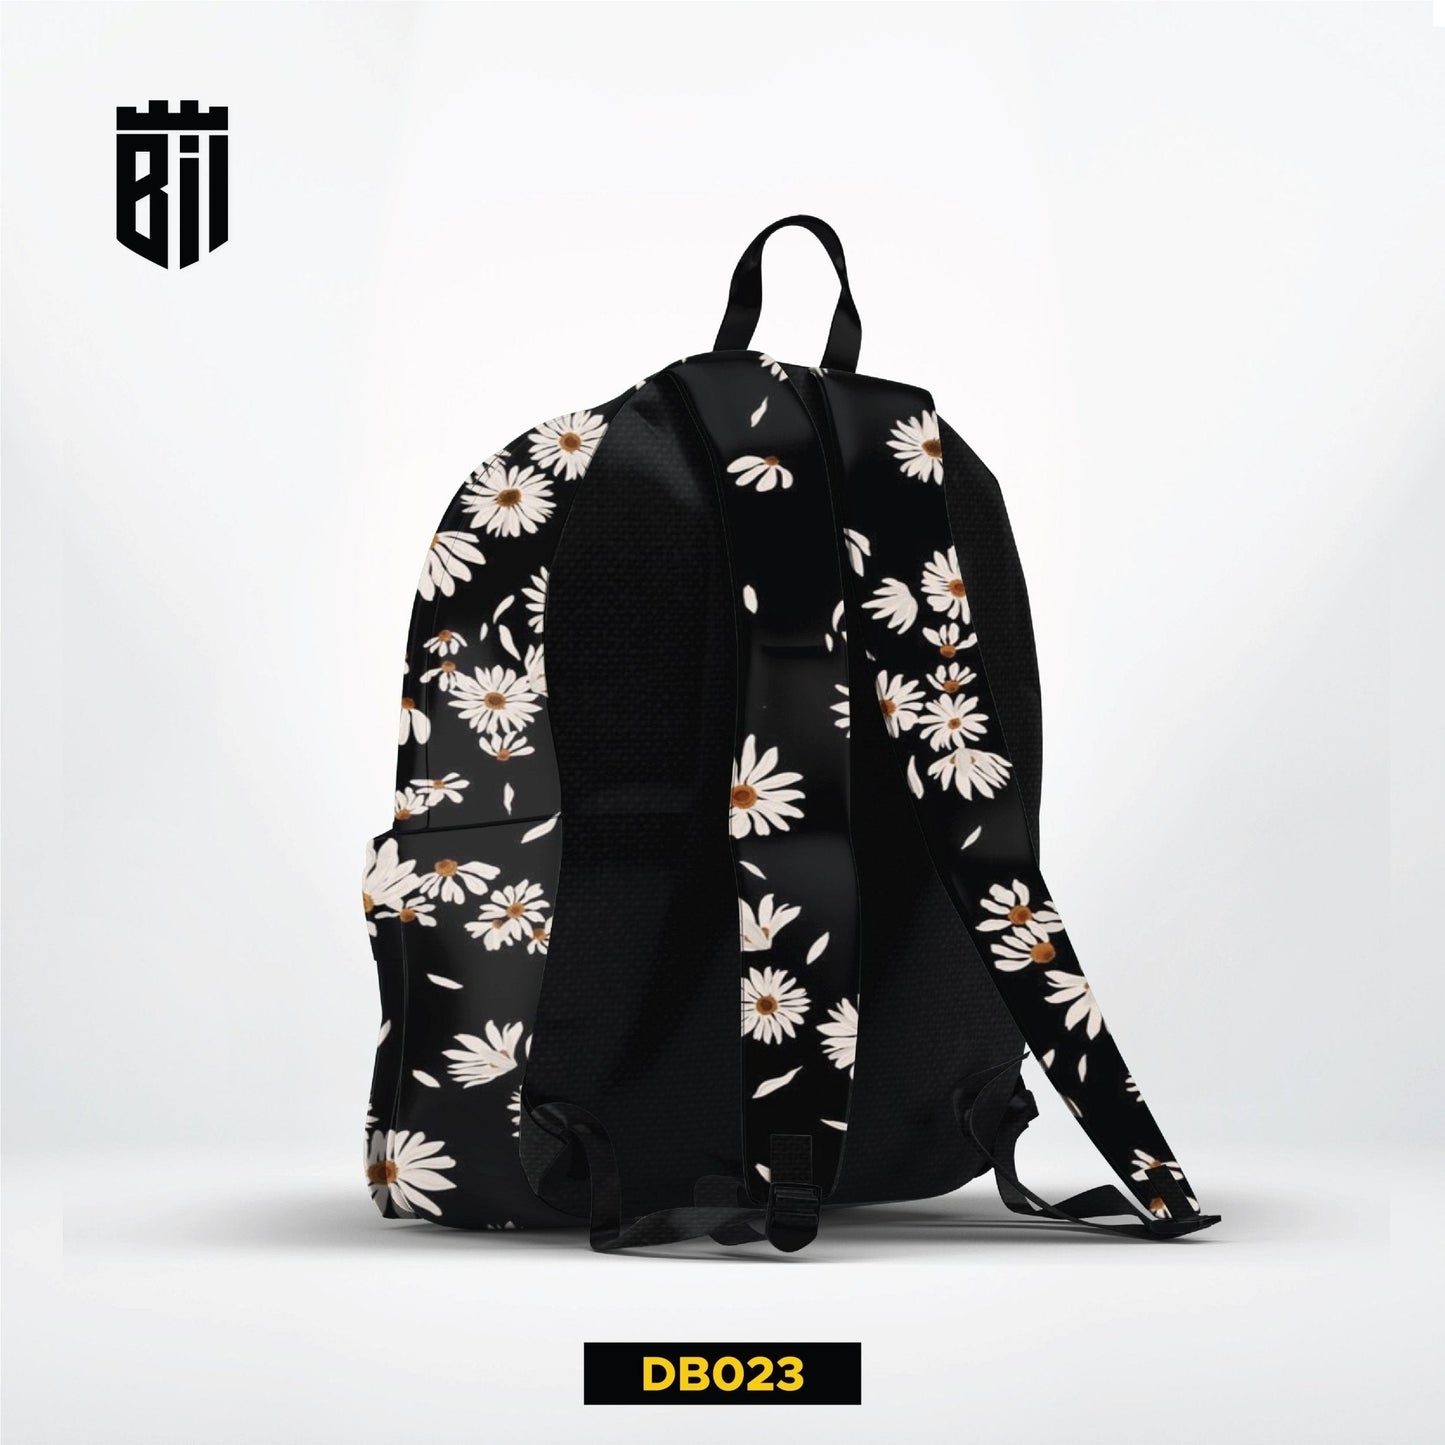 DB023 Pop Daisy Allover Printed Backpack - BREACHIT